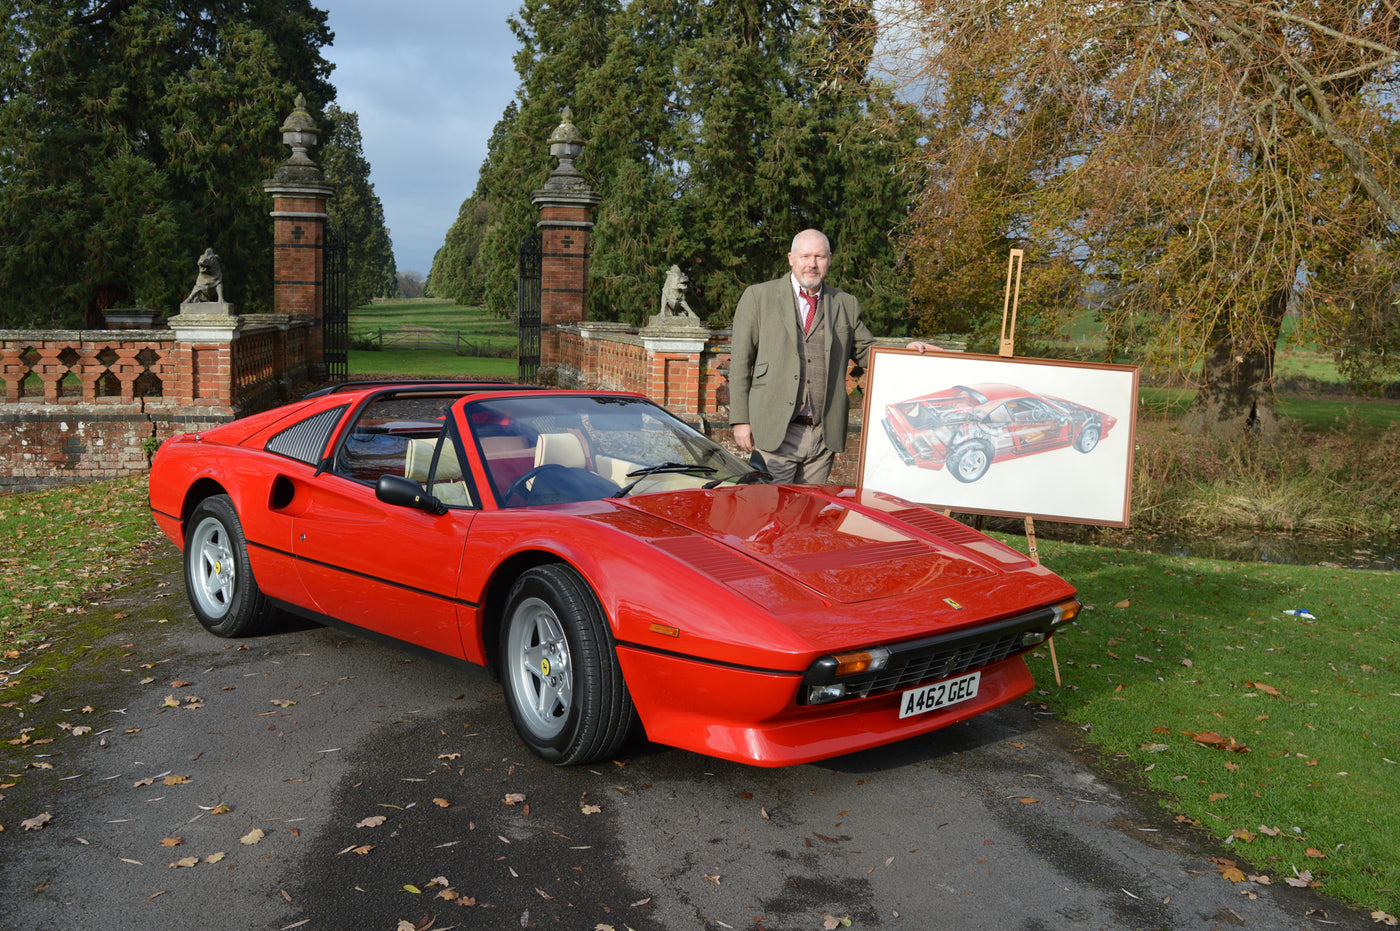 Meet John: From Painting A Ferrari 308 To Owning One